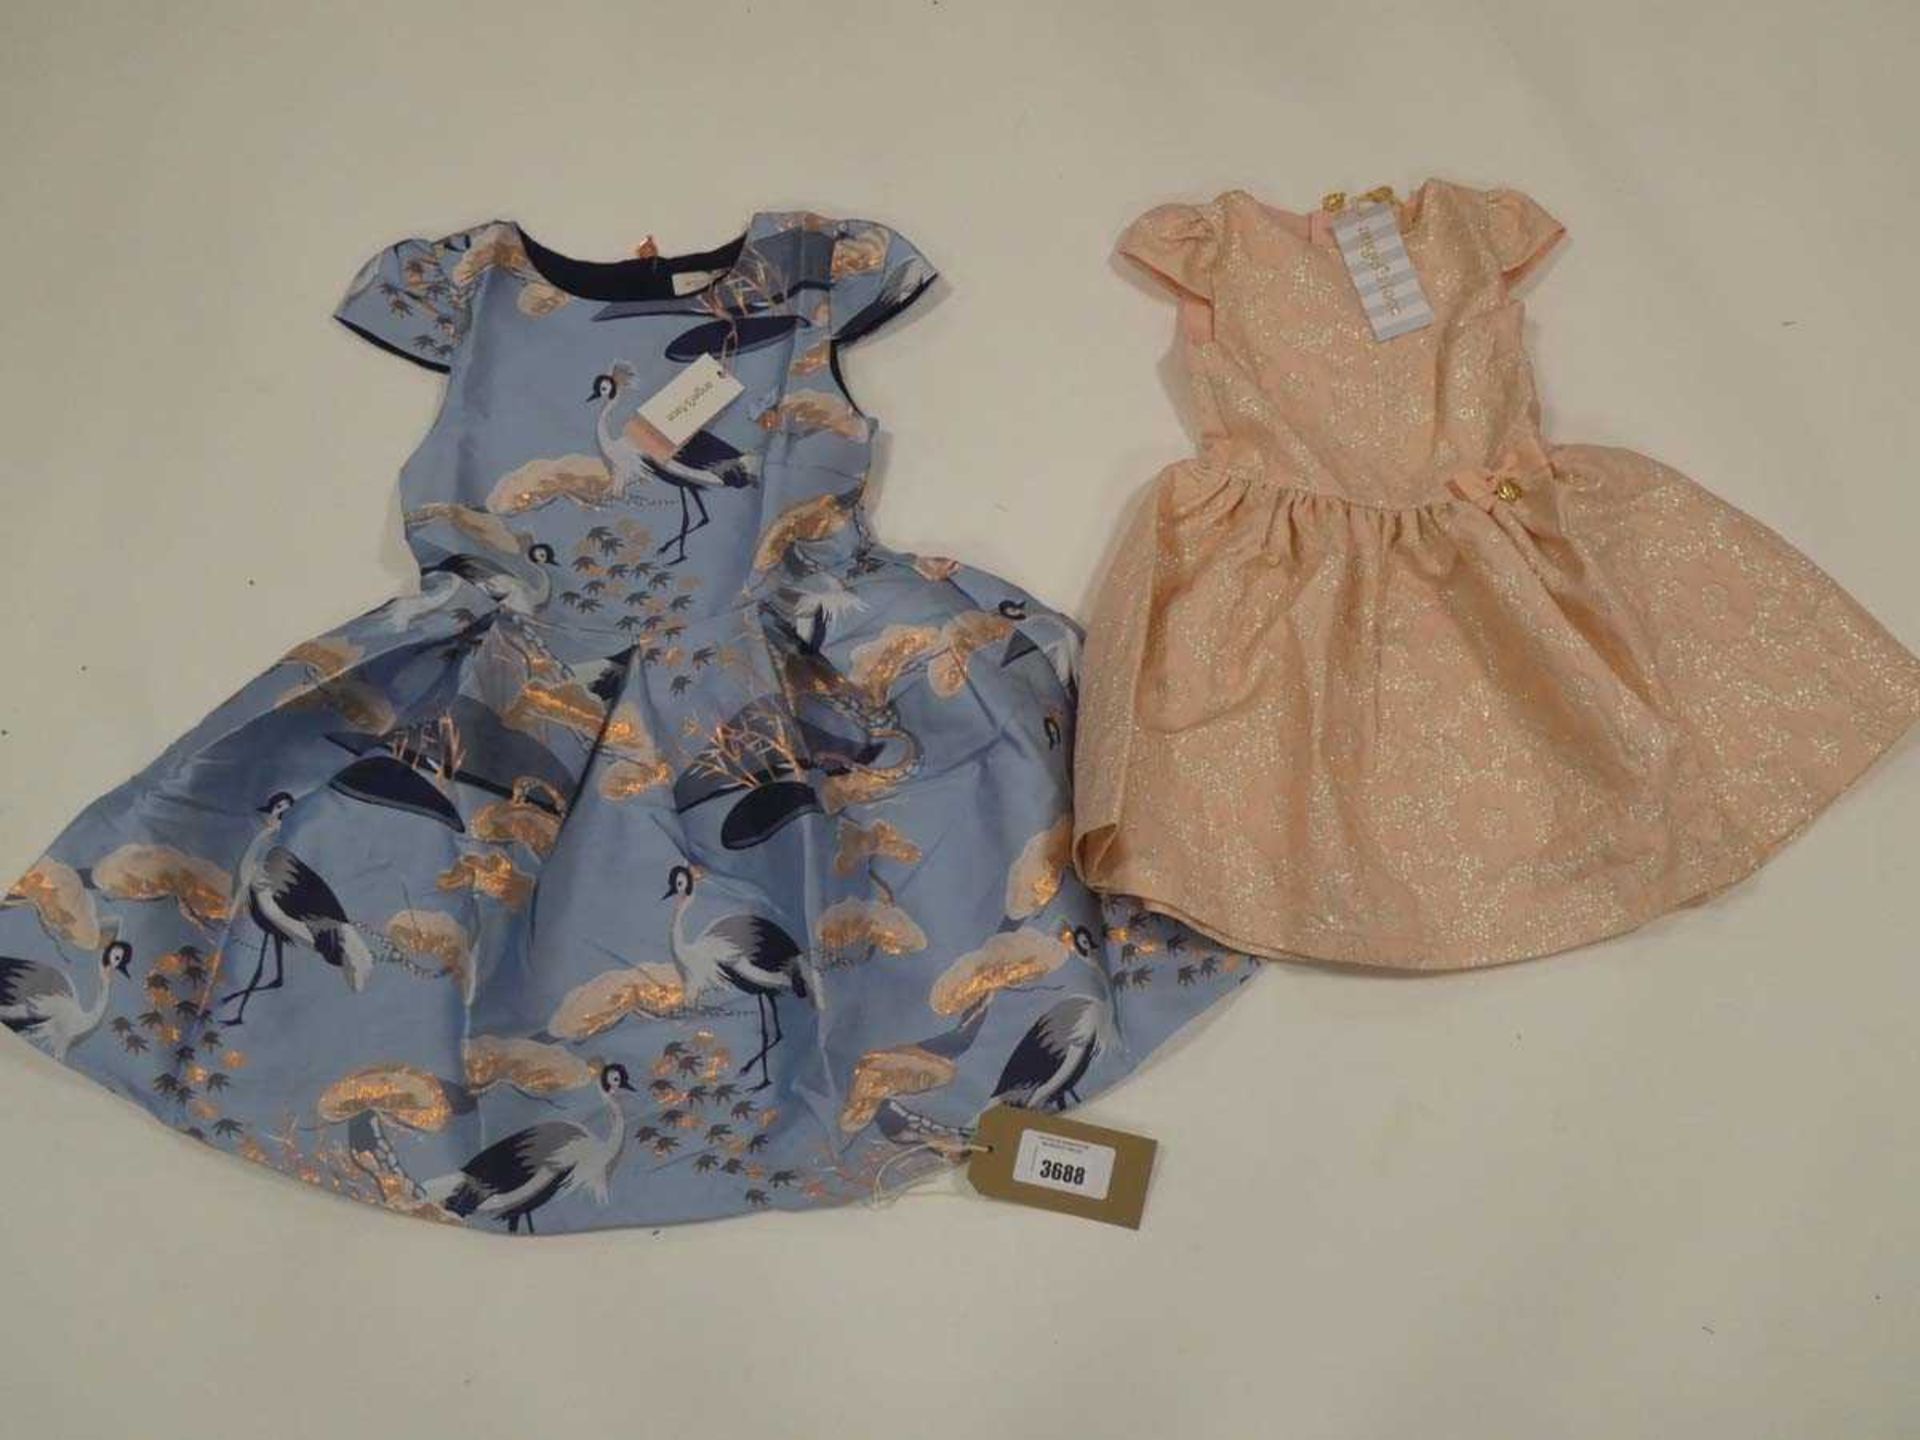 Angel's Face by Keely Deininger bridget dress in blush age 5-6 together with heron dress in baby